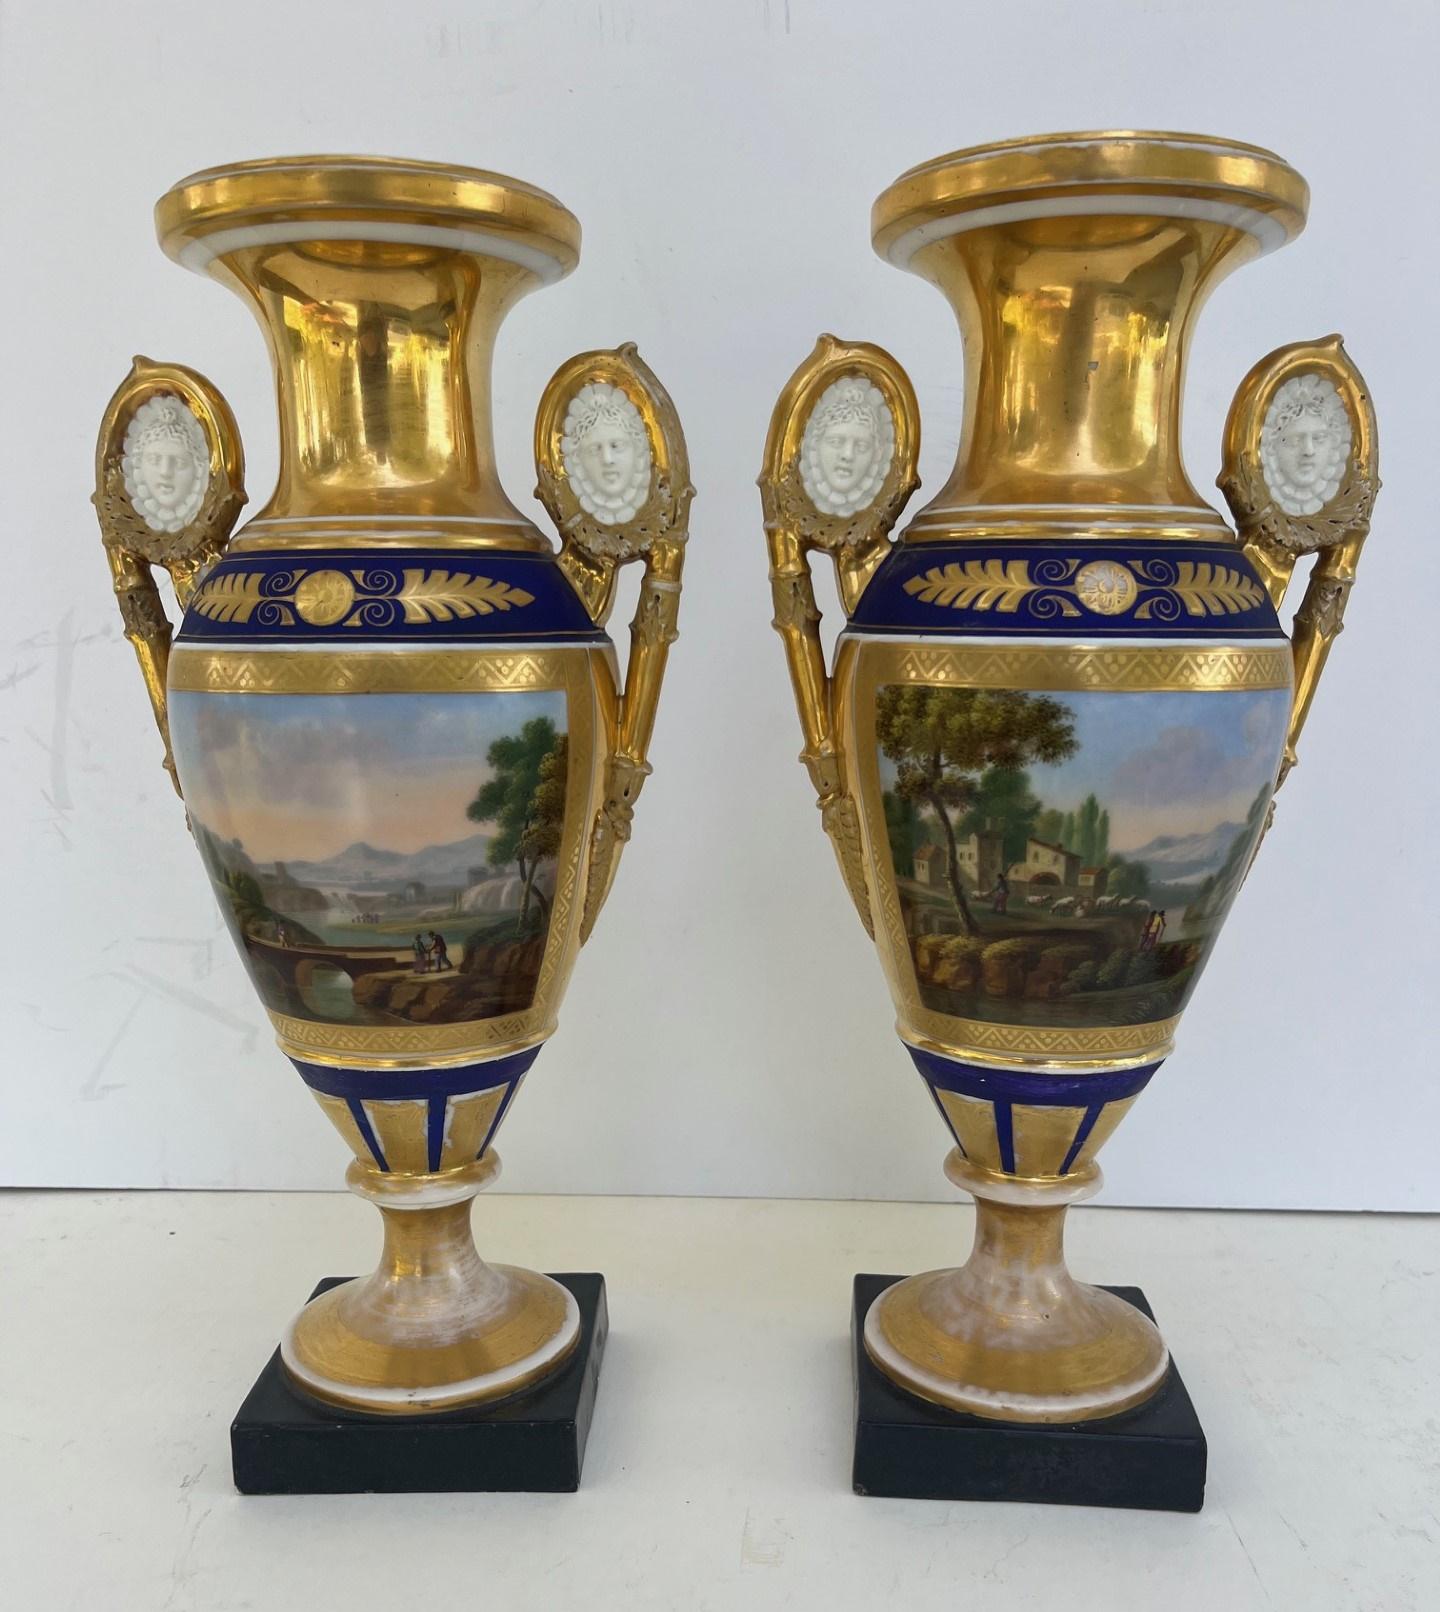 Pair of Paris Two Handled Vases in Gold and Cobalt Blue.

Pair of early 19th century Paris baluster shaped porcelain vases. Elaborately painted on each side with the most intricate polychrome and gilded decorations. The exceptional execution of the